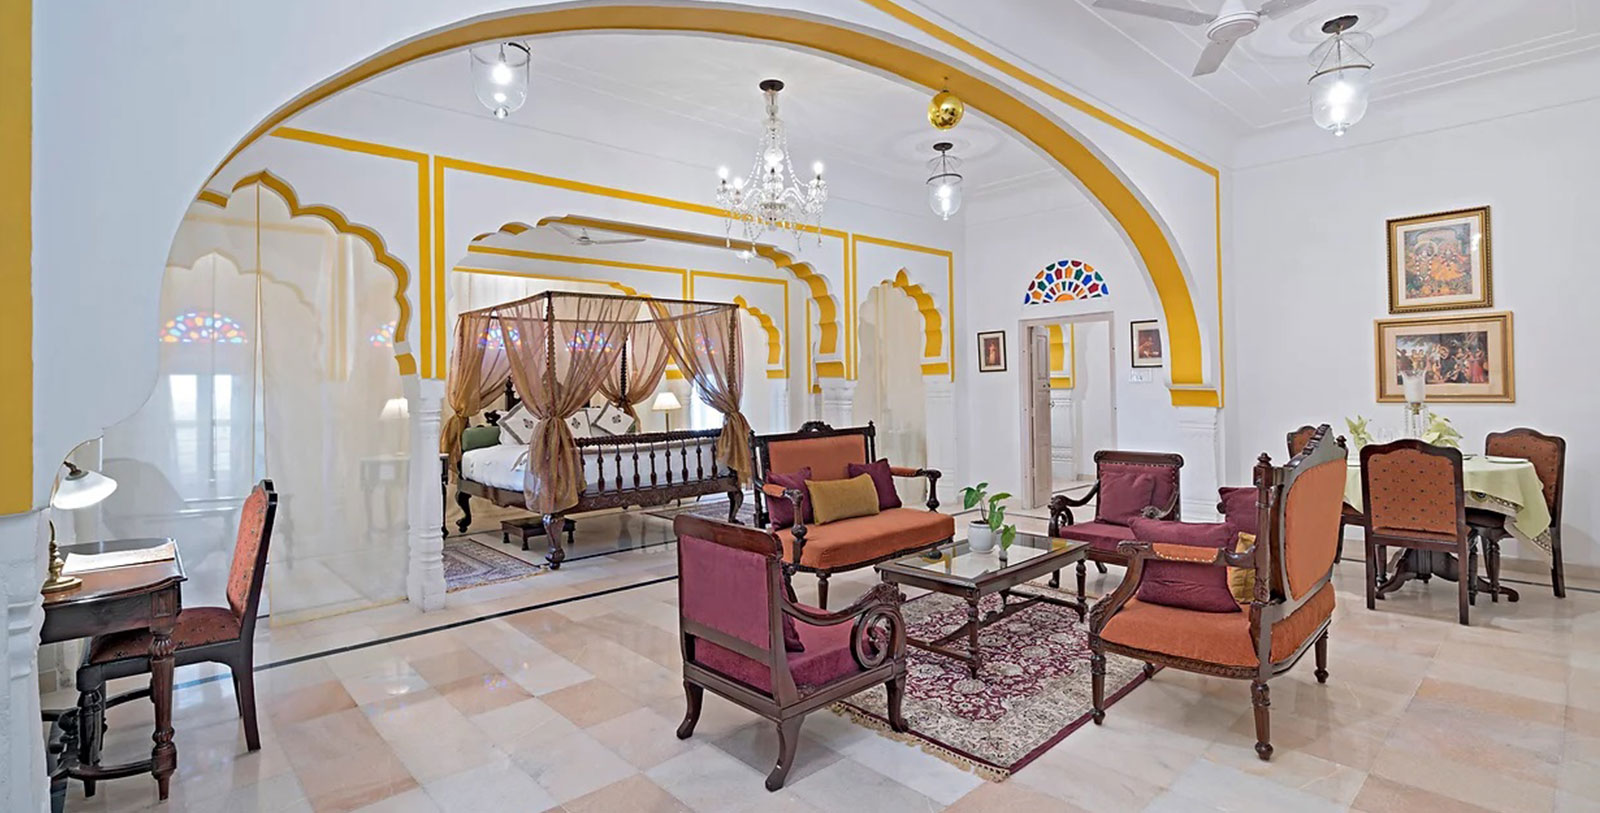 Image of guestroom suite Alsisar Mahal, 1800s, Member of Historic Hotels Worldwide, in Jhunjhunu, India, Accommodations